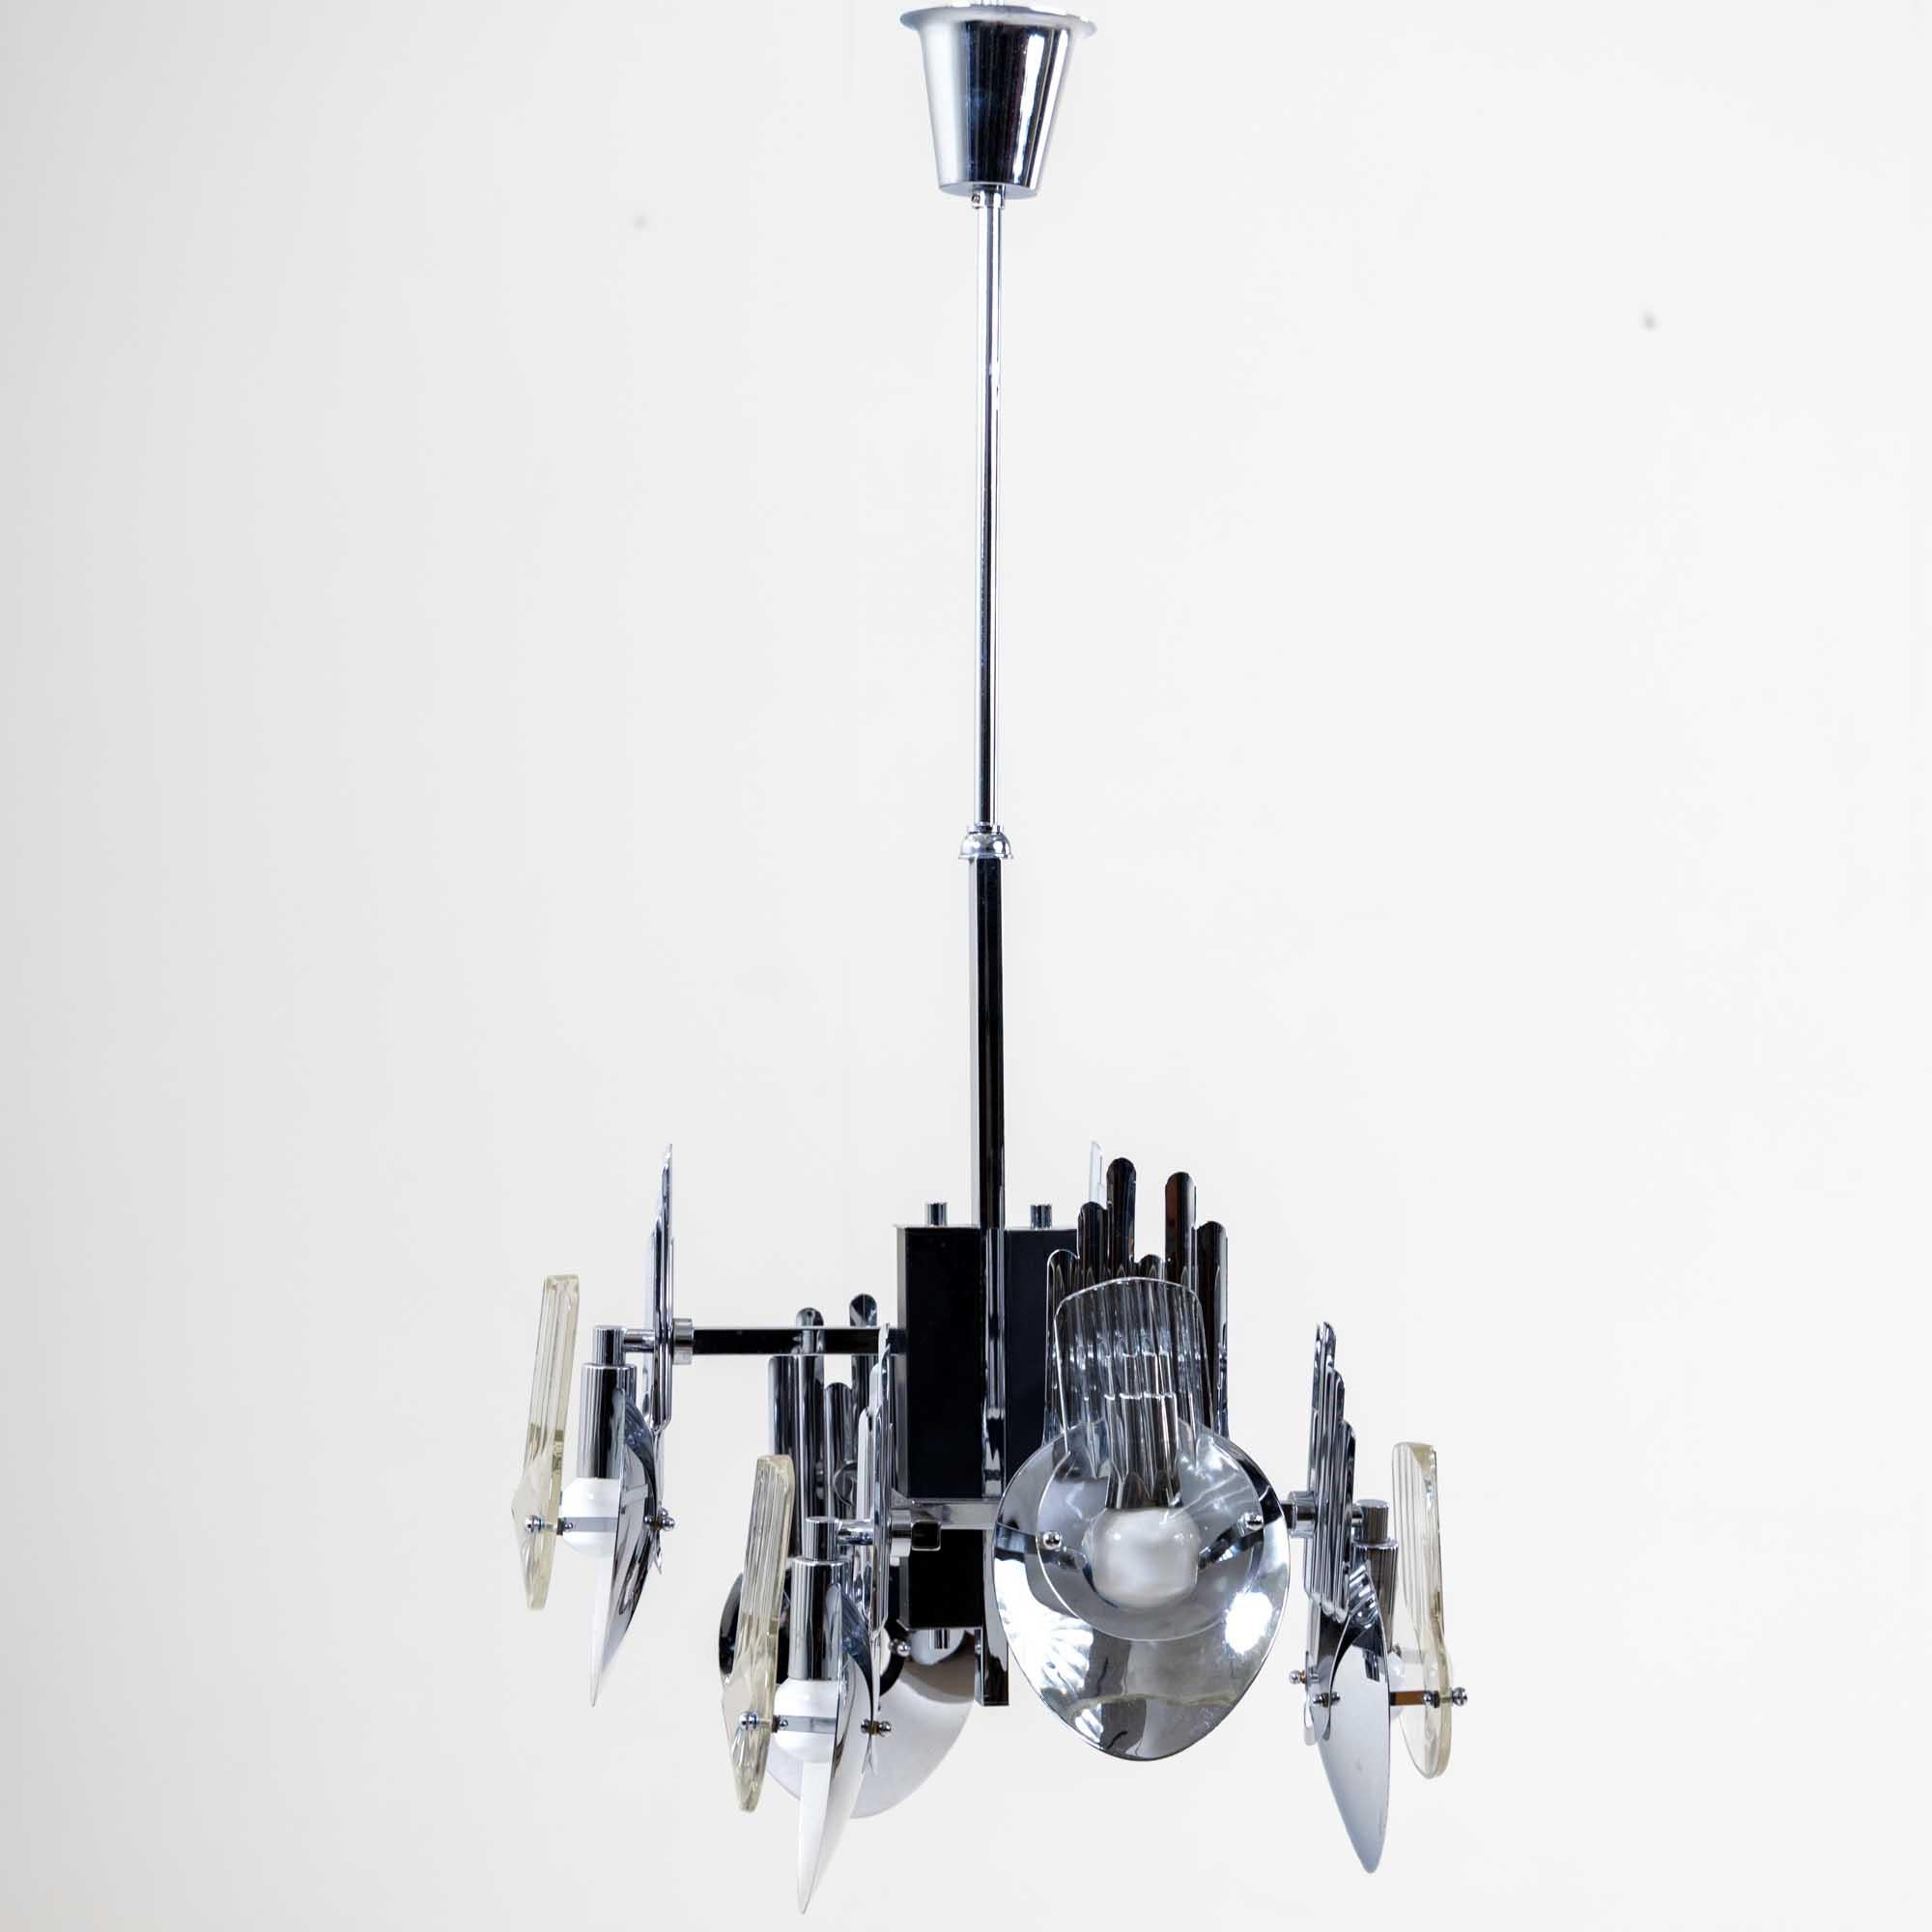 Six-armed chandelier made of chrome-plated metal by Oscar Torlasco. The light bulbs are mounted between thick glass panes and concave metal discs. The reflected light creates interesting effects.